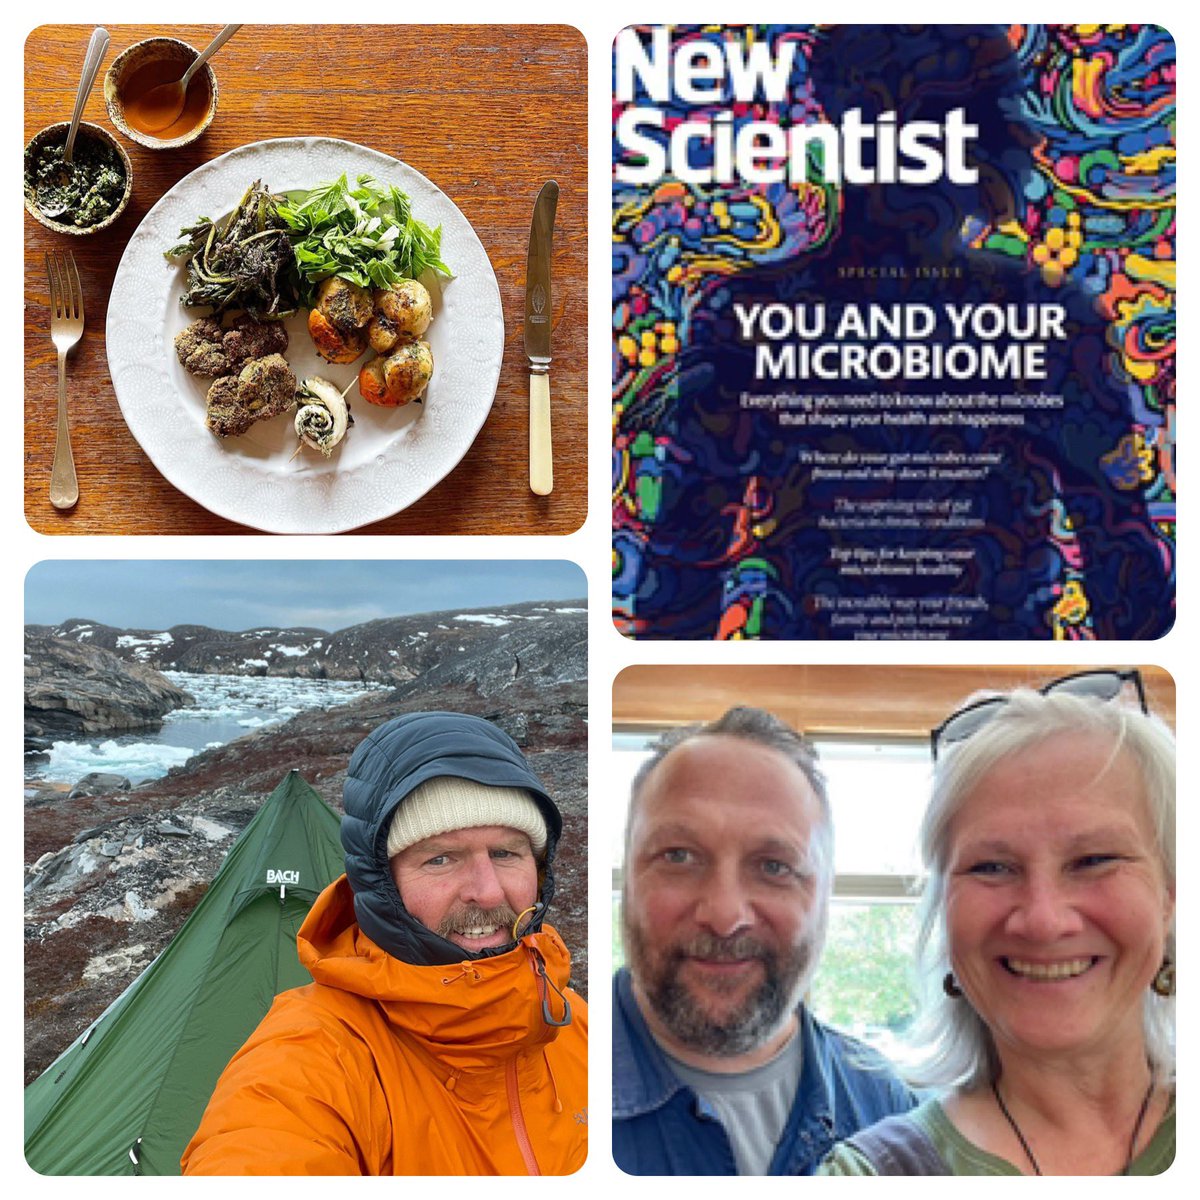 As @newscientist goes big on microbiomes in a👌 special edition, at @BBCFoodProg we’re fine-tuning our own. For months we followed @monicawilde & 30 foragers on a wild diet + @mikekeencooks on an Inuit diet. How did their bodies, health (& microbes change)? @BBCRadio4 Oct 15.